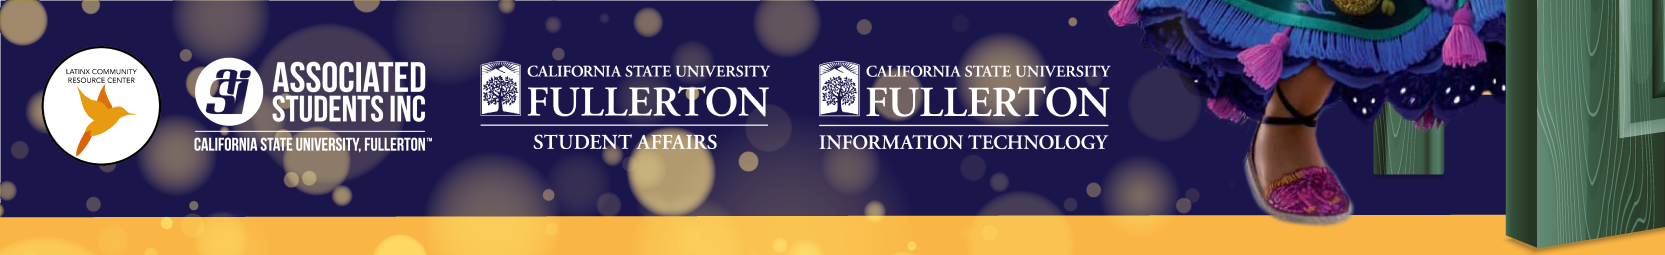 LCRC, Associated Students Inc., California State University Fullerton, Student Affairs, Information Technology